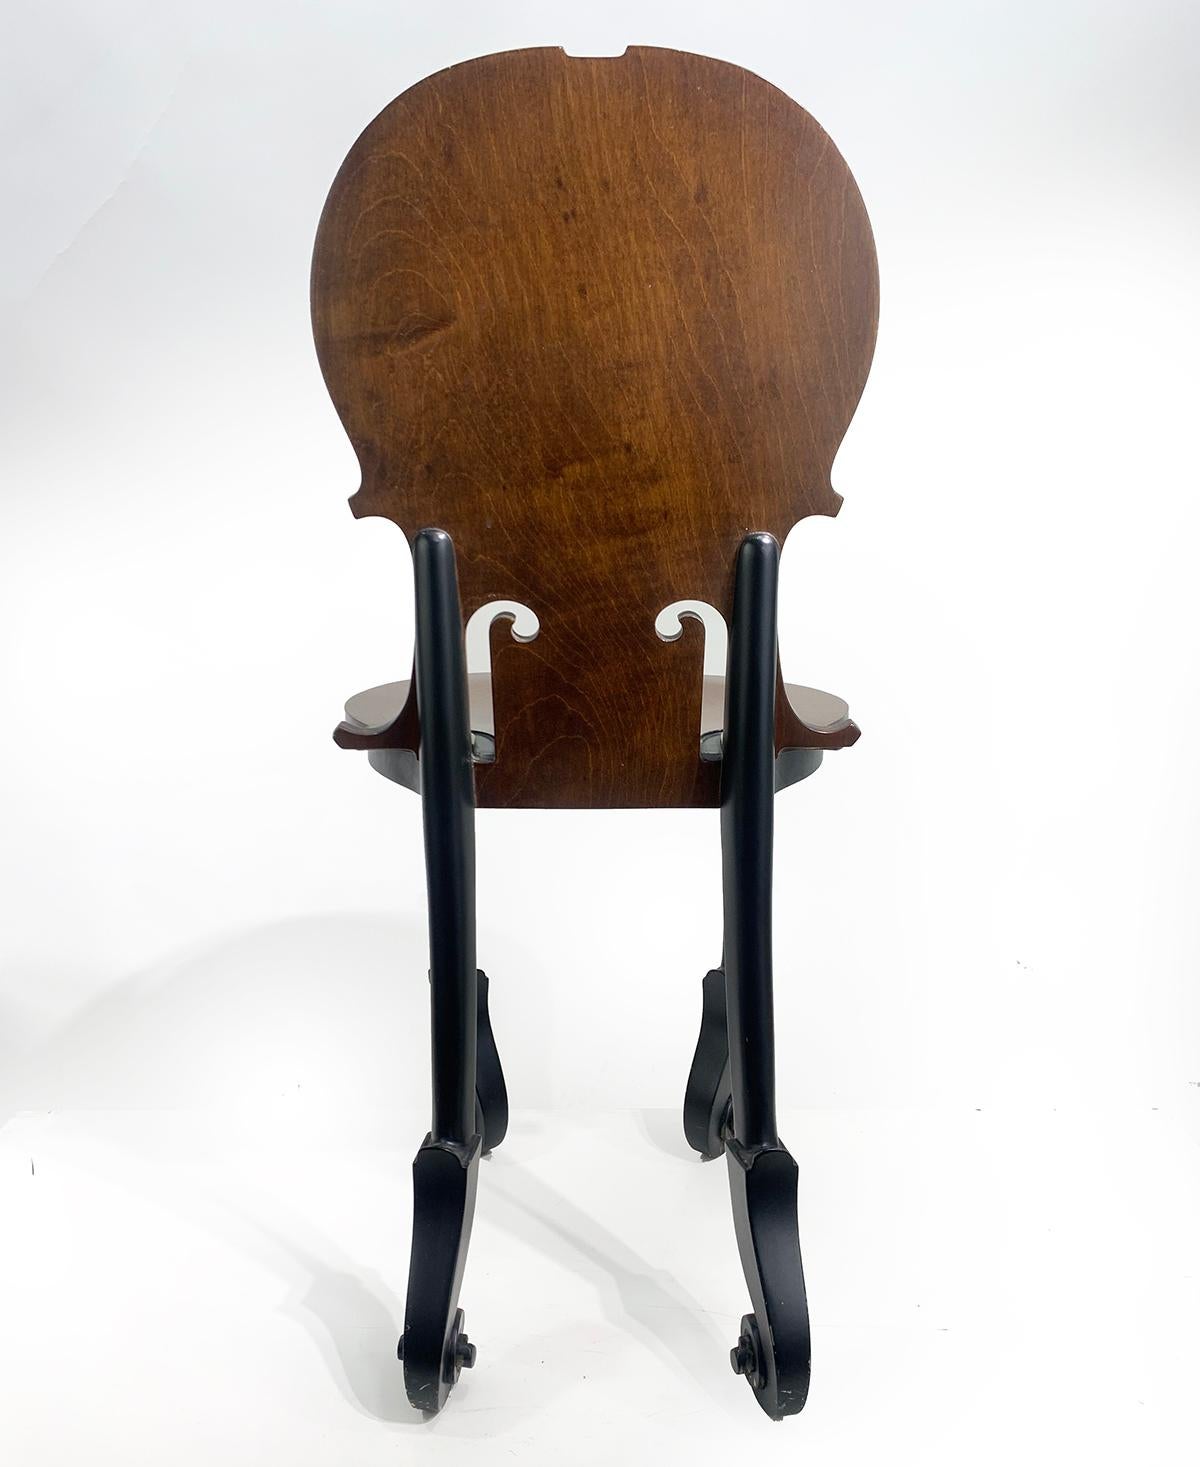 Wood Unique Creation of Arman, 'CELLO' Chair, Editions Hugues Chevalier